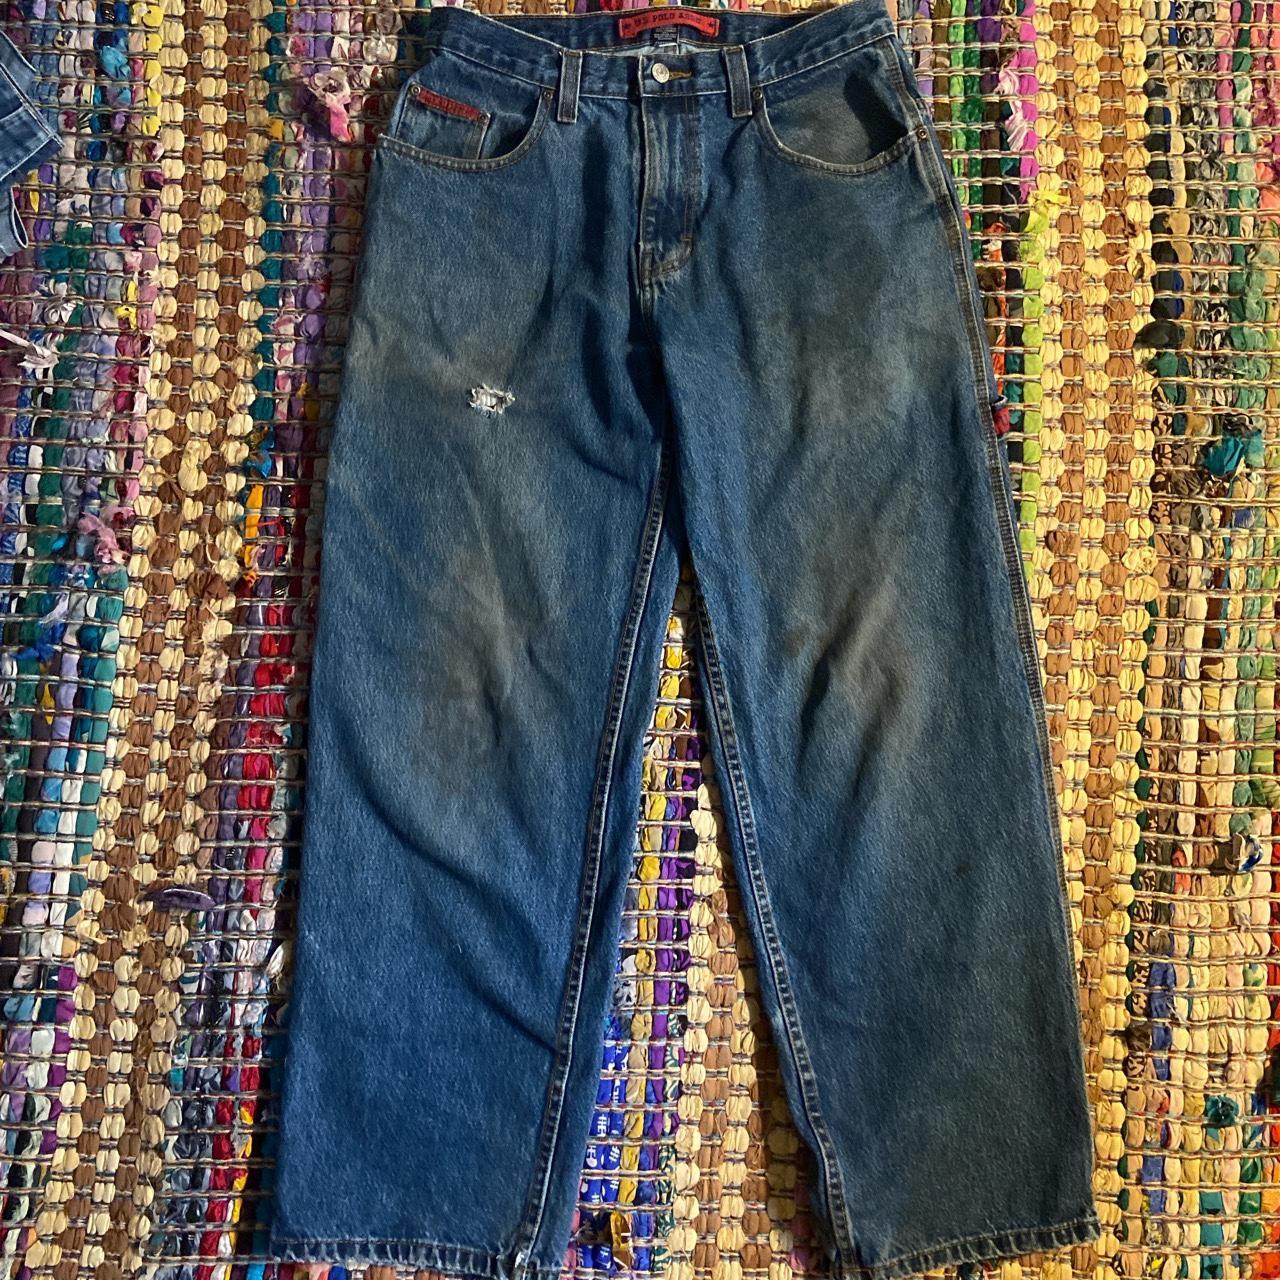 U.S. Polo Assn. Men's Blue and Red Jeans | Depop